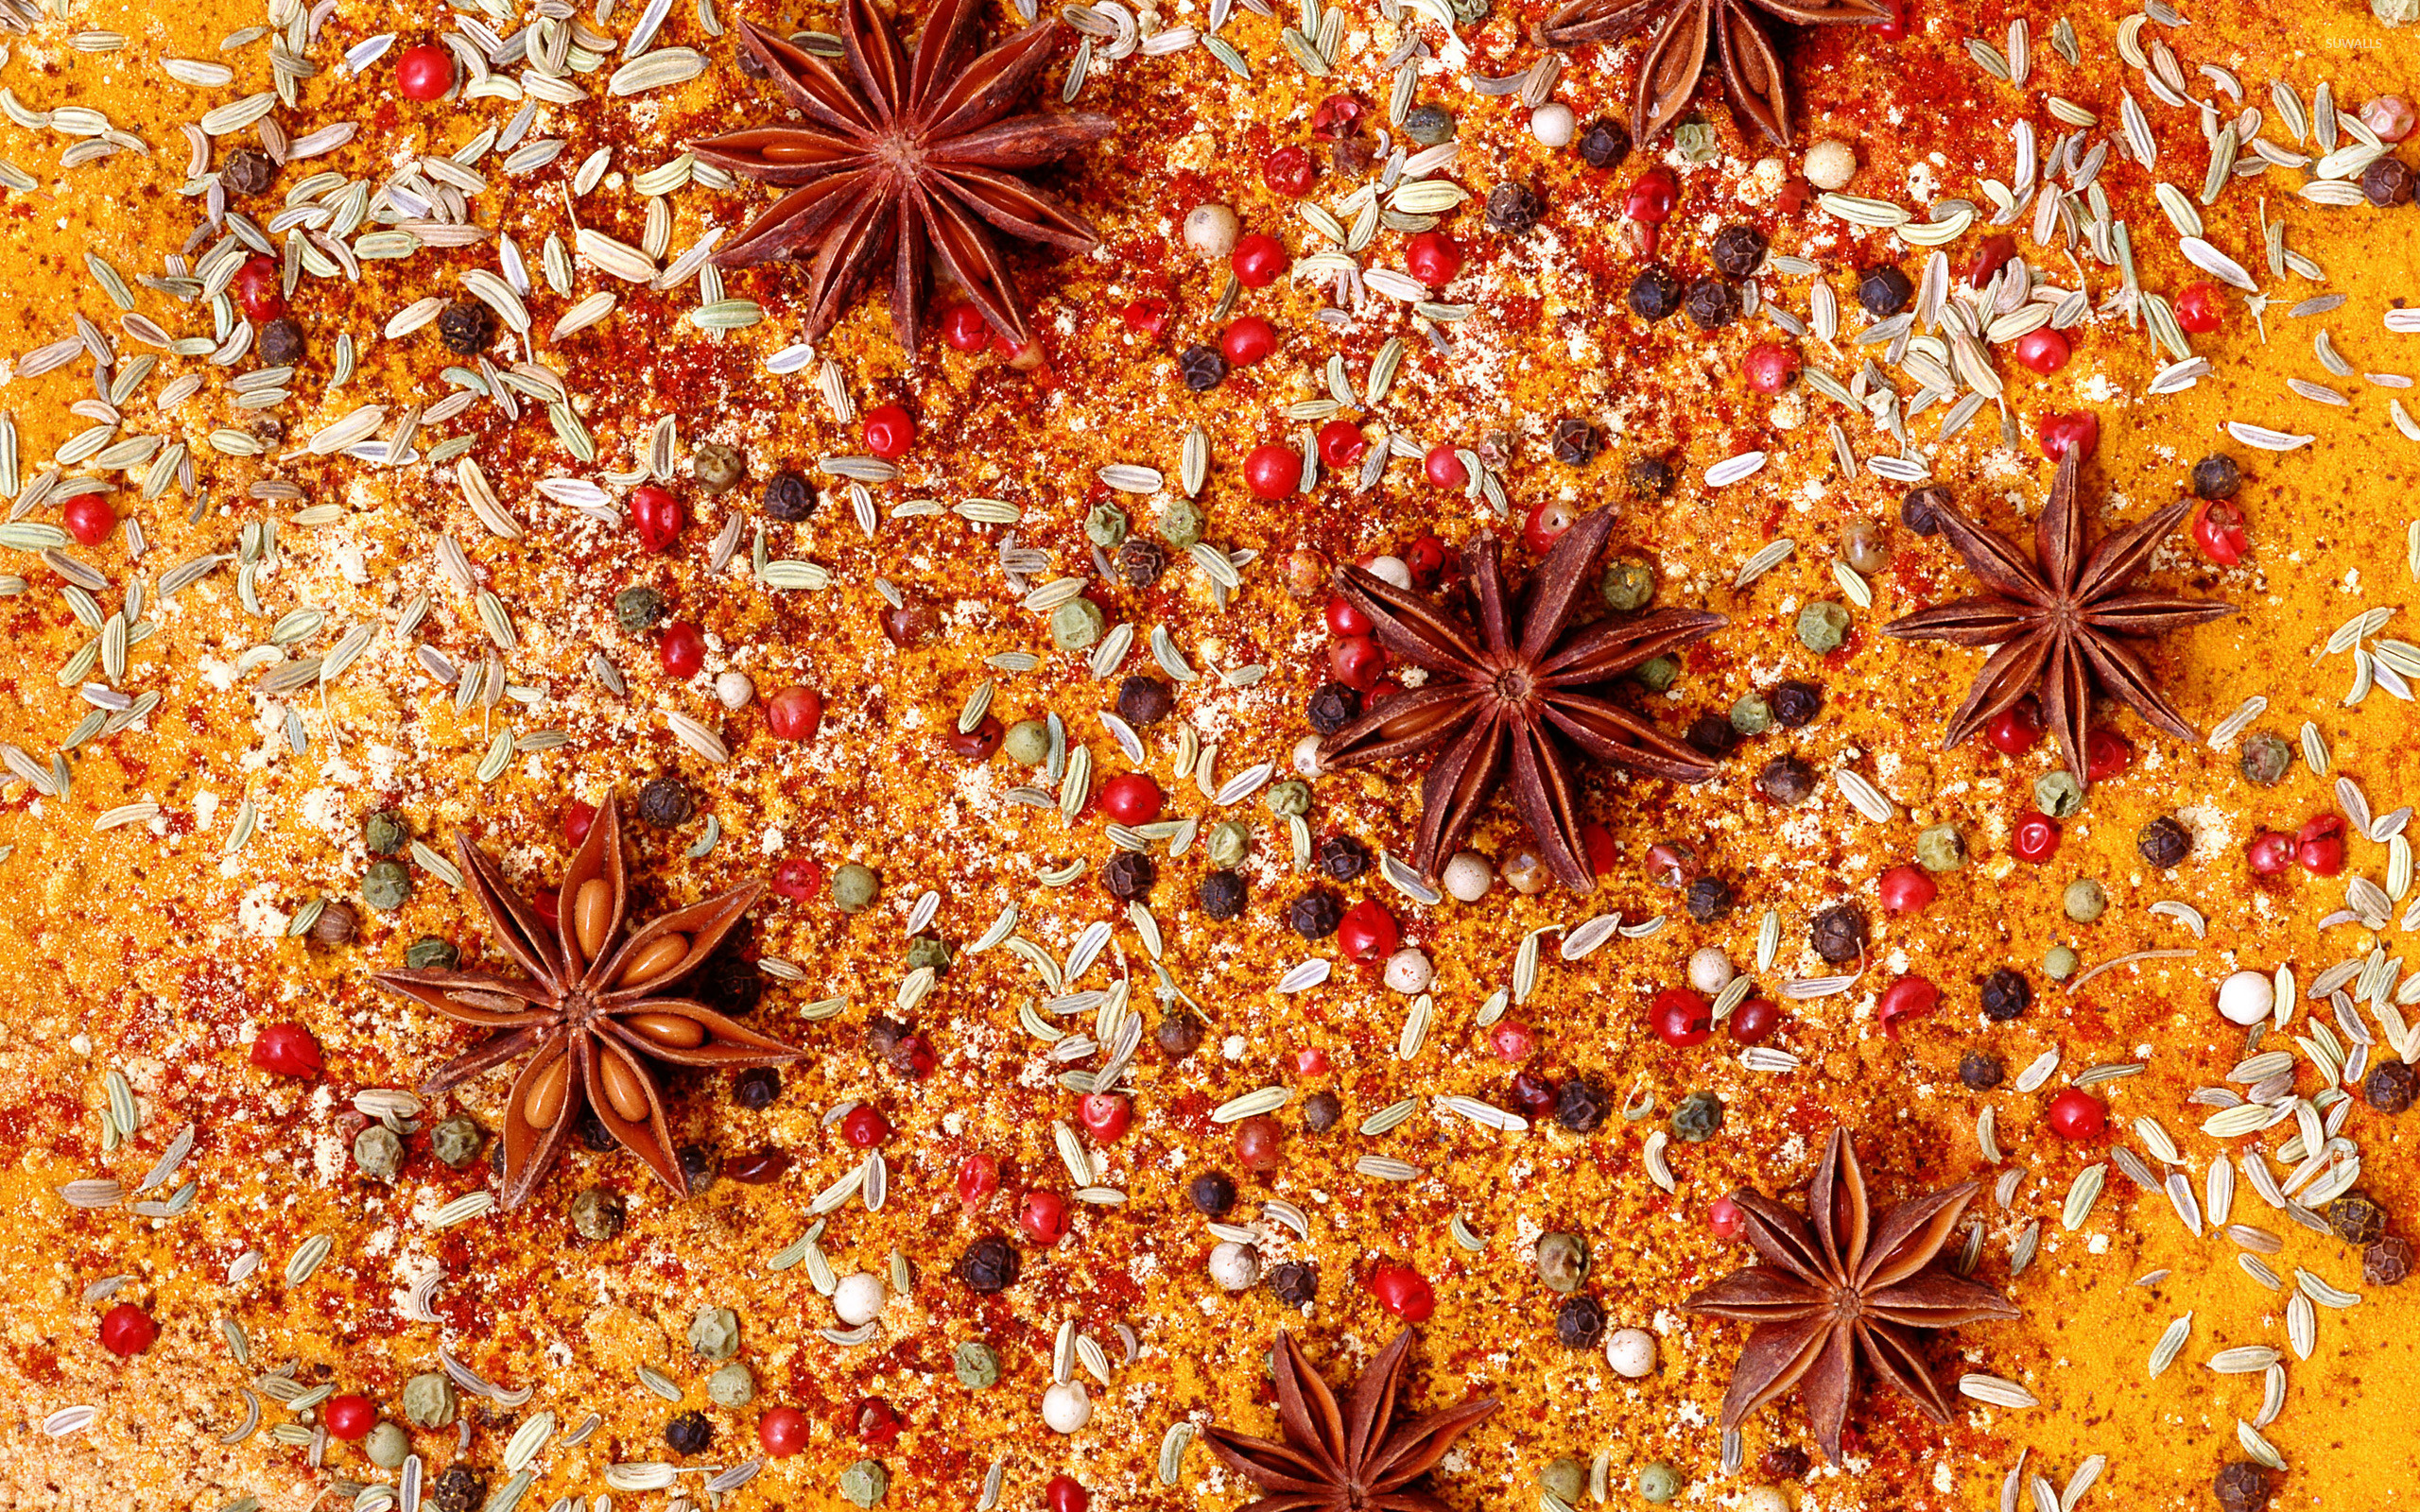 Spices: Star anise fruits and seeds, Illicium verum. 2560x1600 HD Wallpaper.